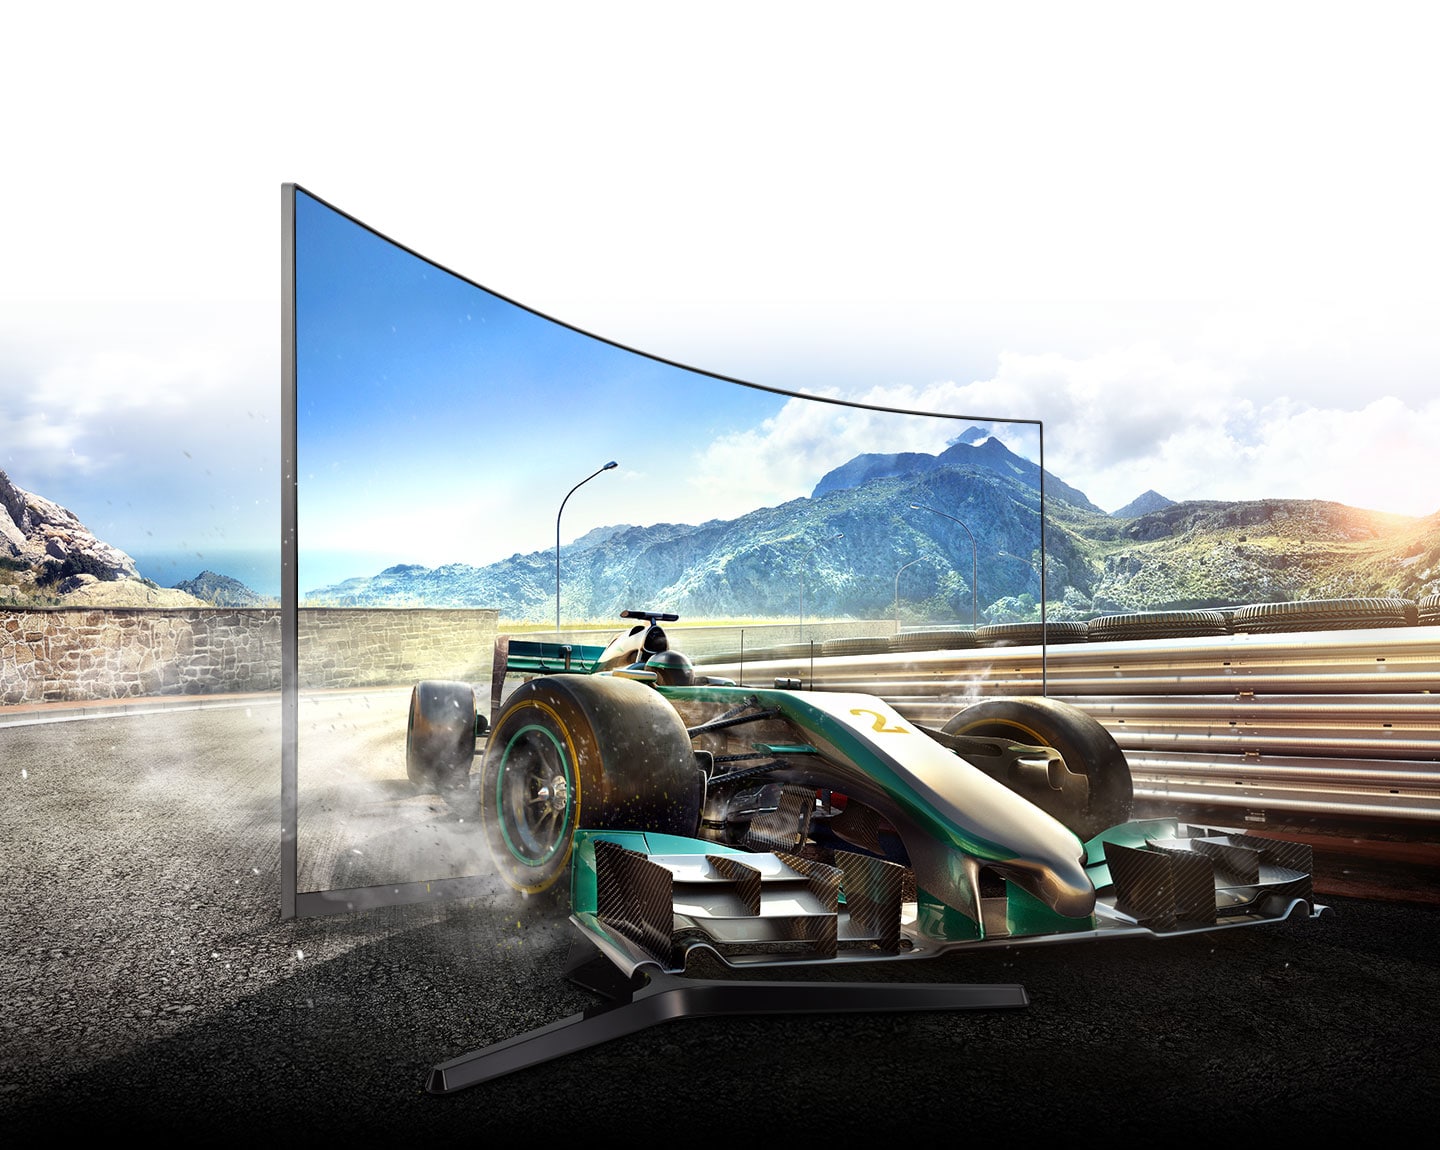 A racecar coming out of the curved monitor screen that's blending with the racetrack in mountains background